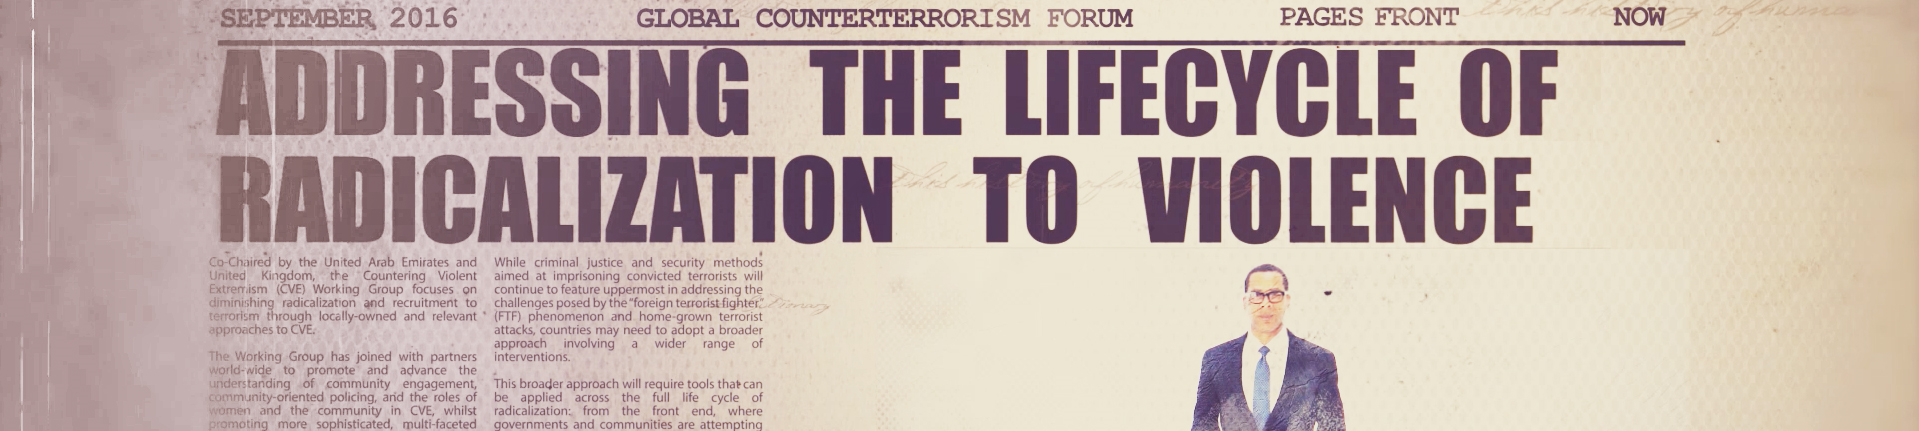 Banner Addressing the lifecycle of radicalization to violence